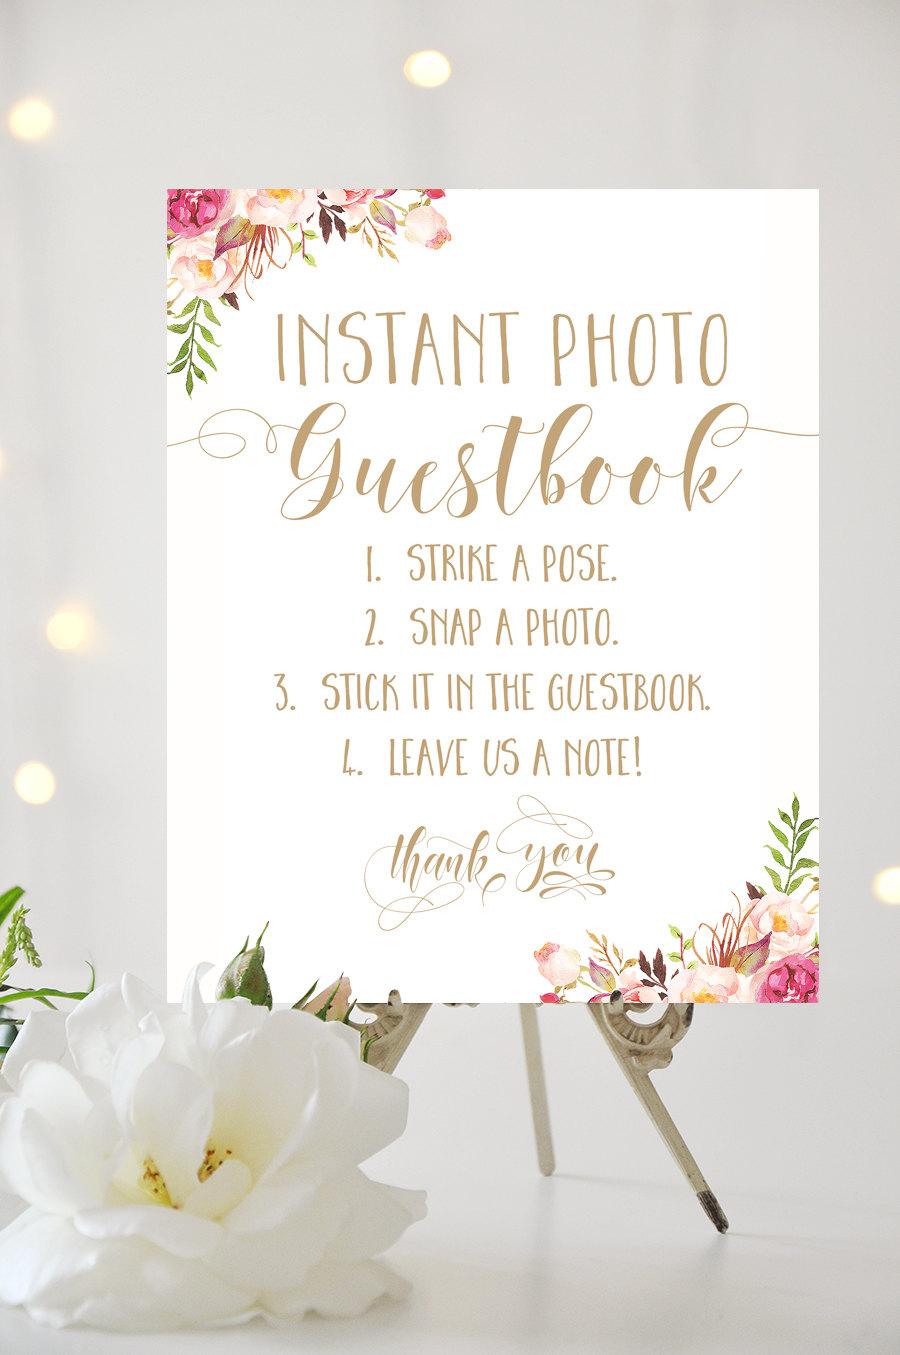 Свадьба - Instant Photo Guestbook Sign - 8 x 10 - Printable sign in "Shine" antique gold  - Romantic Blooms - PDF and JPG files - Instant Download